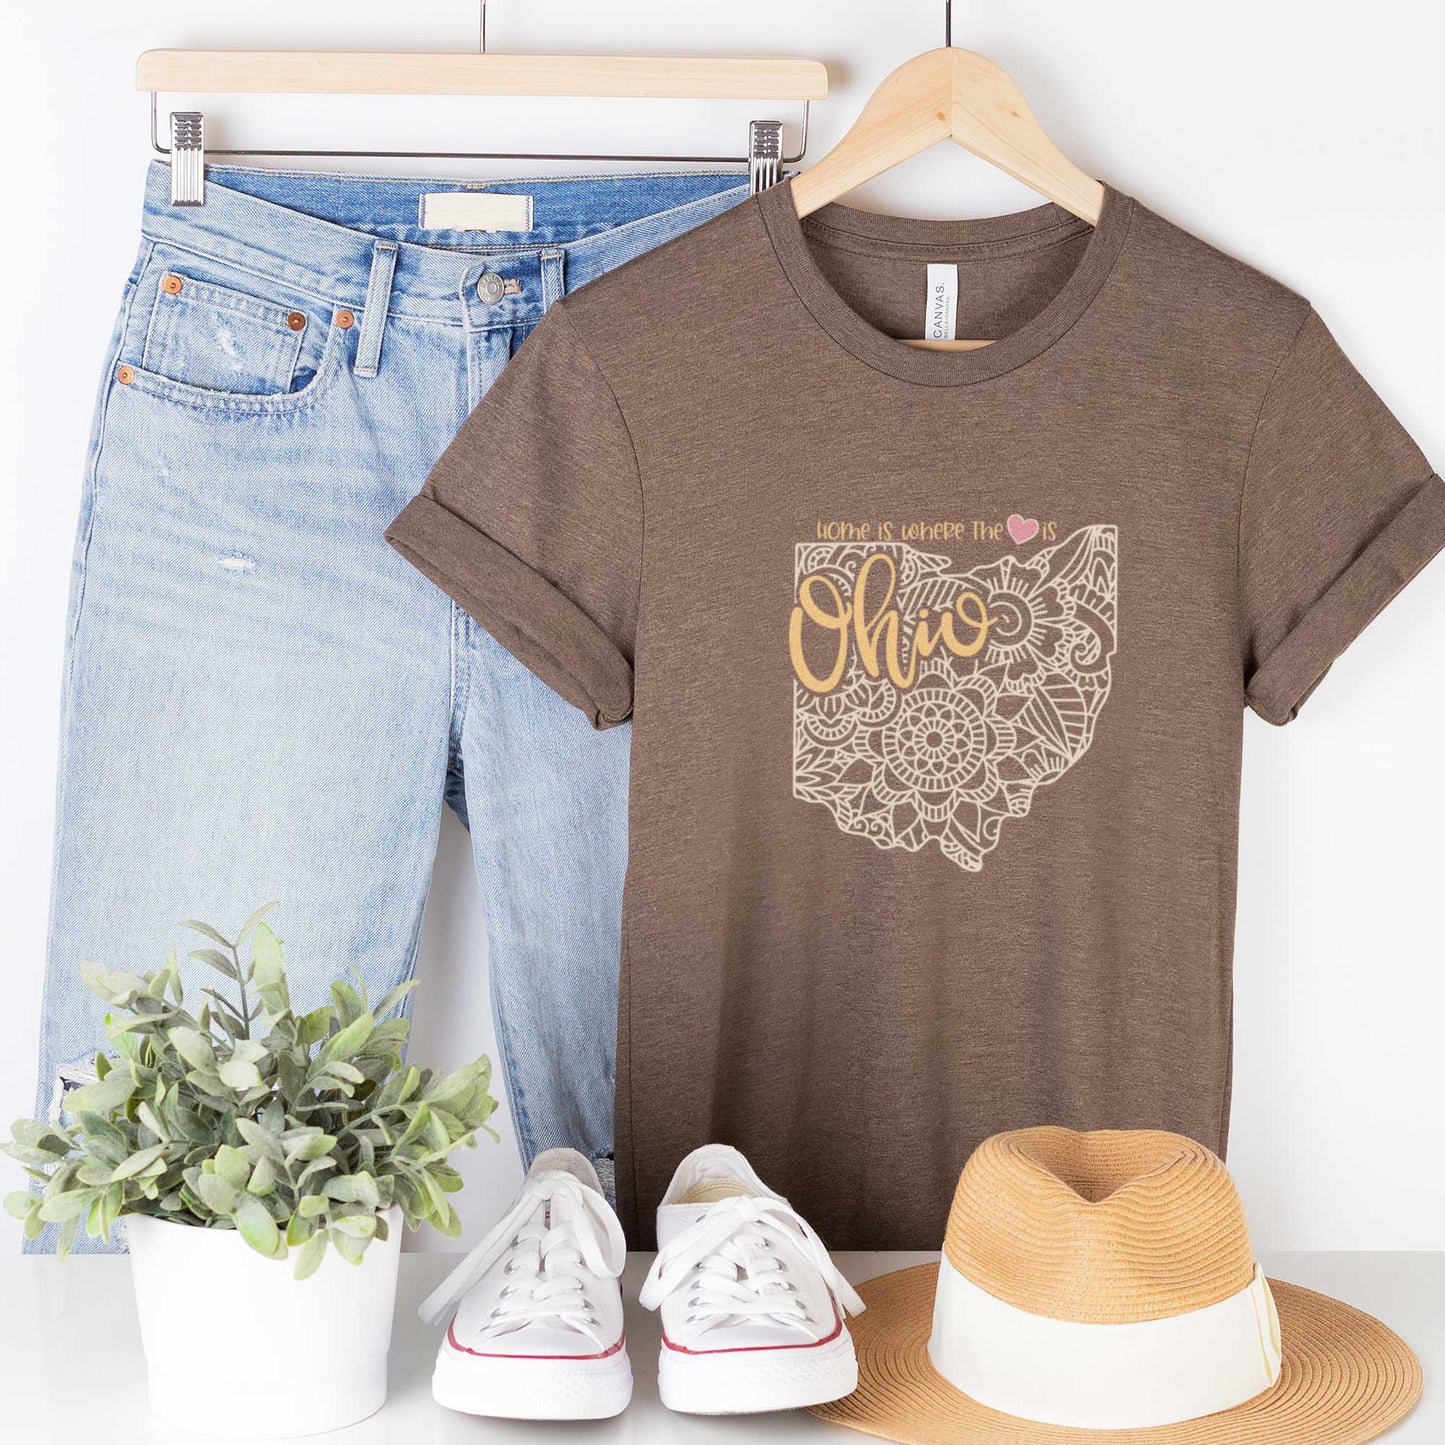 A hanging heather brown Bella Canvas t-shirt featuring a mandala in the shape of Ohio with the words home is where the heart is.